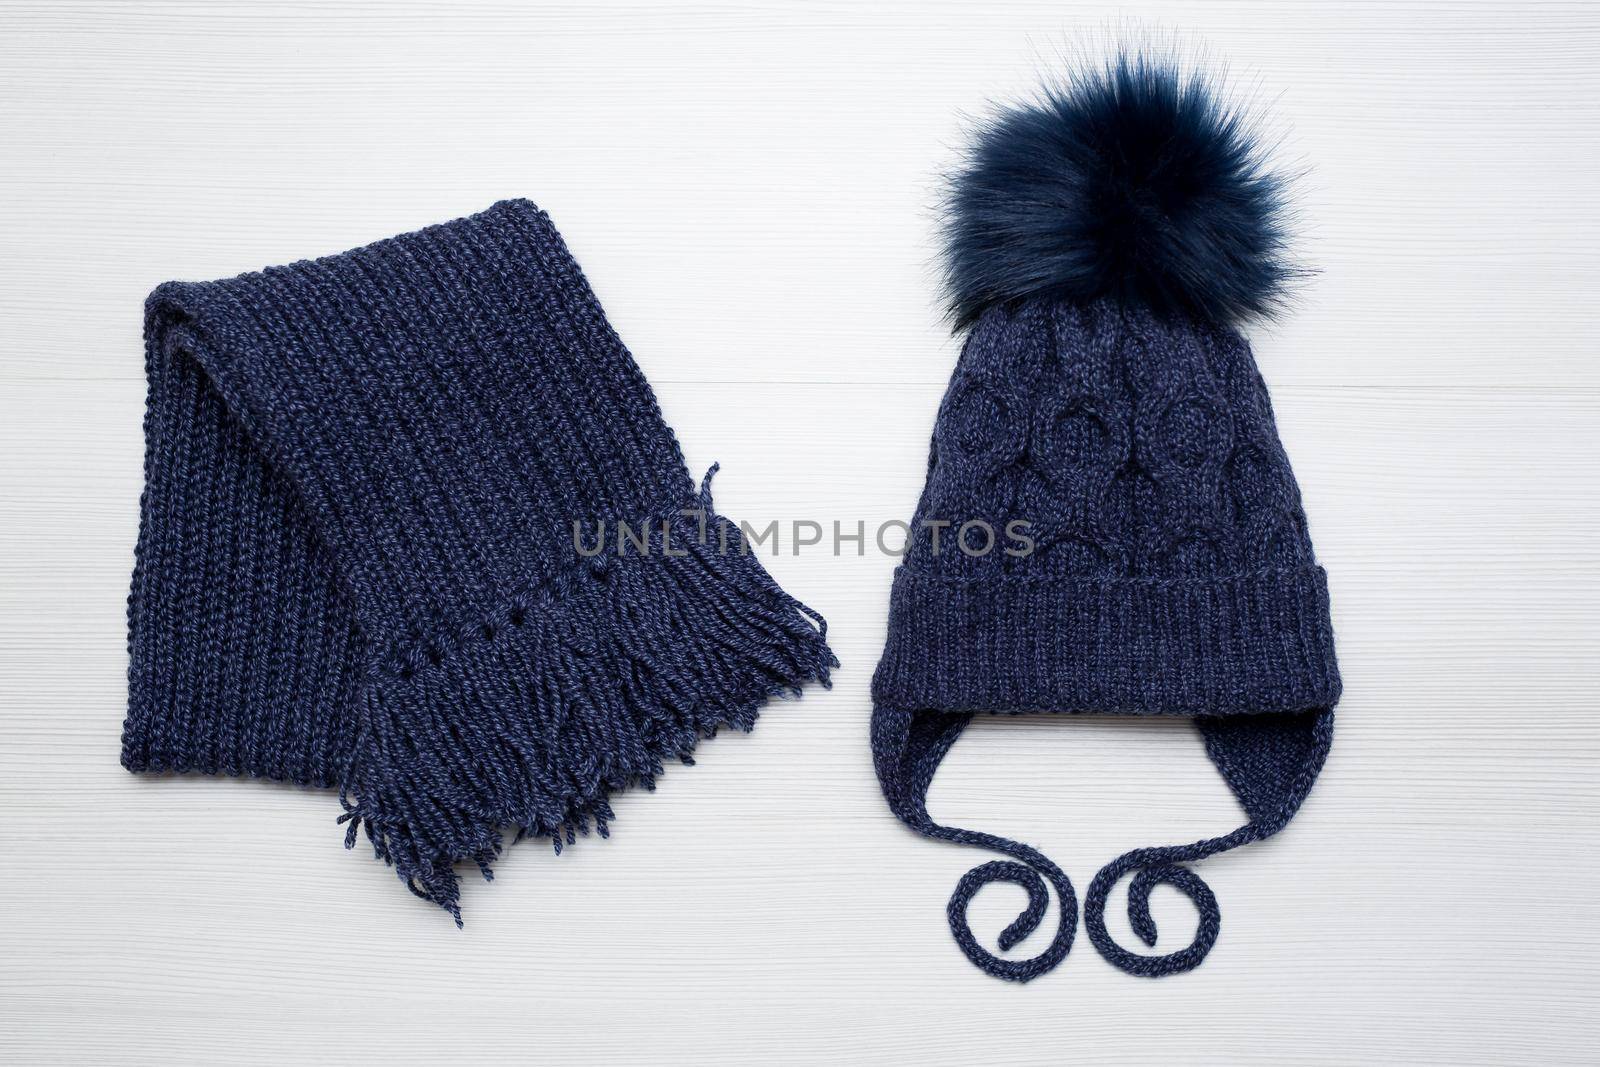 Winter children's knitted hat and scarf in blue